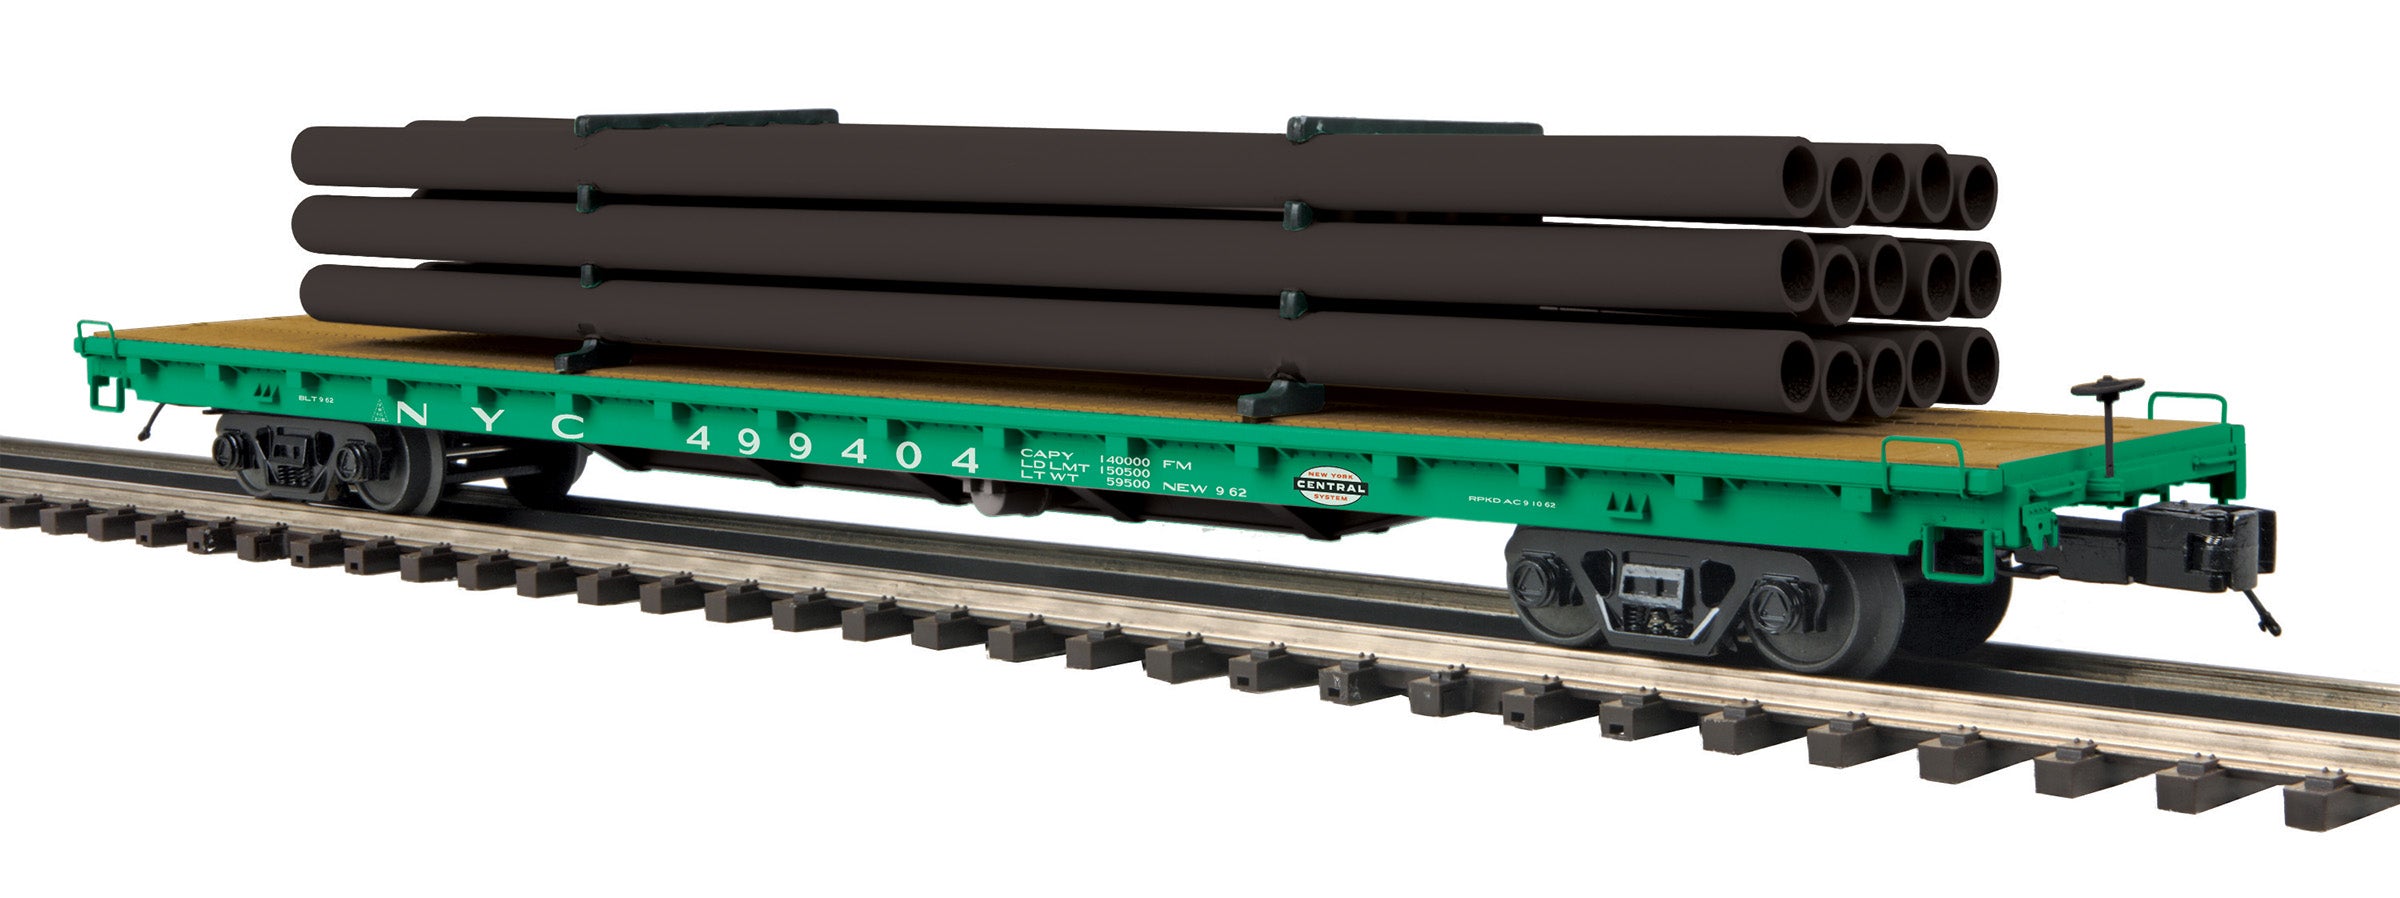 MTH 20-95606 - 60’ Flat Car "New York Central" w/ Pipe Load (Black) #499404 - Custom Run for MrMuffin'sTrains